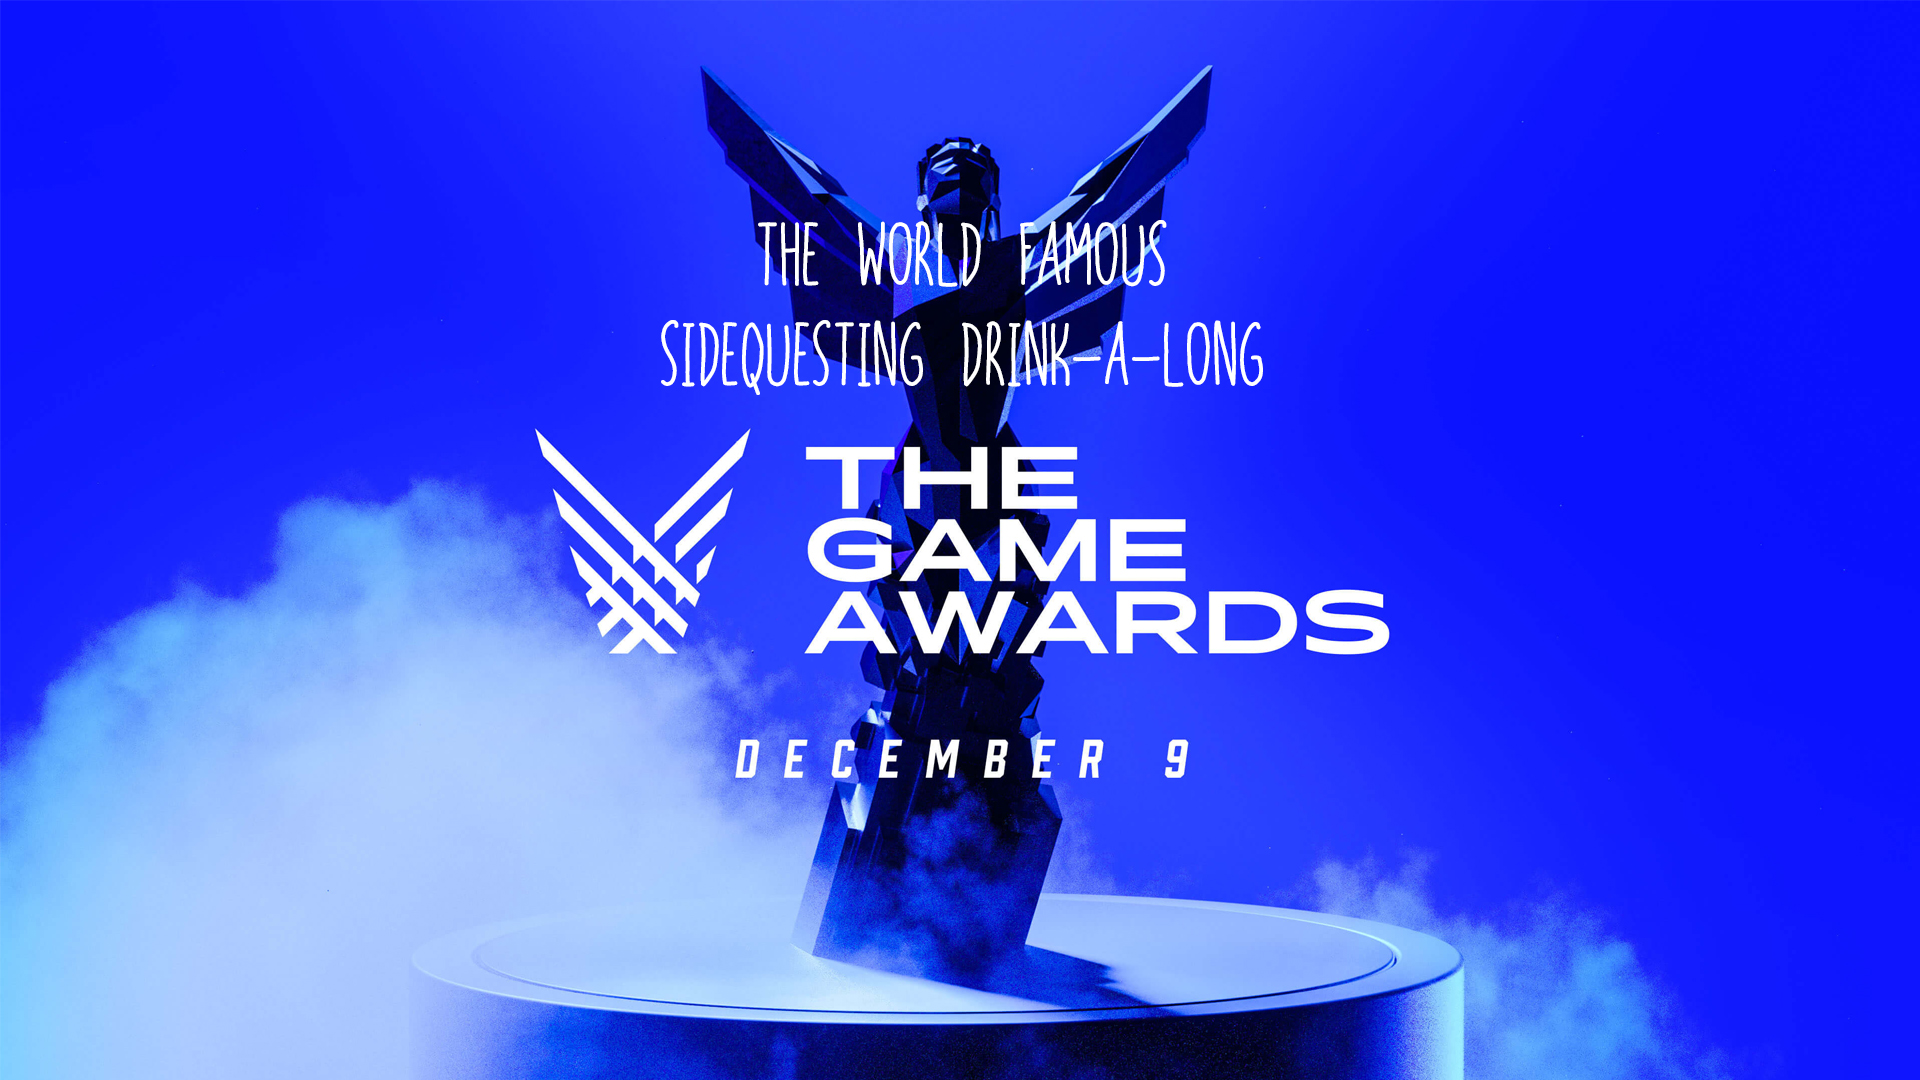 It’s the WORLD FAMOUS SideQuesting  Game Awards 2021 Drink-a-Long